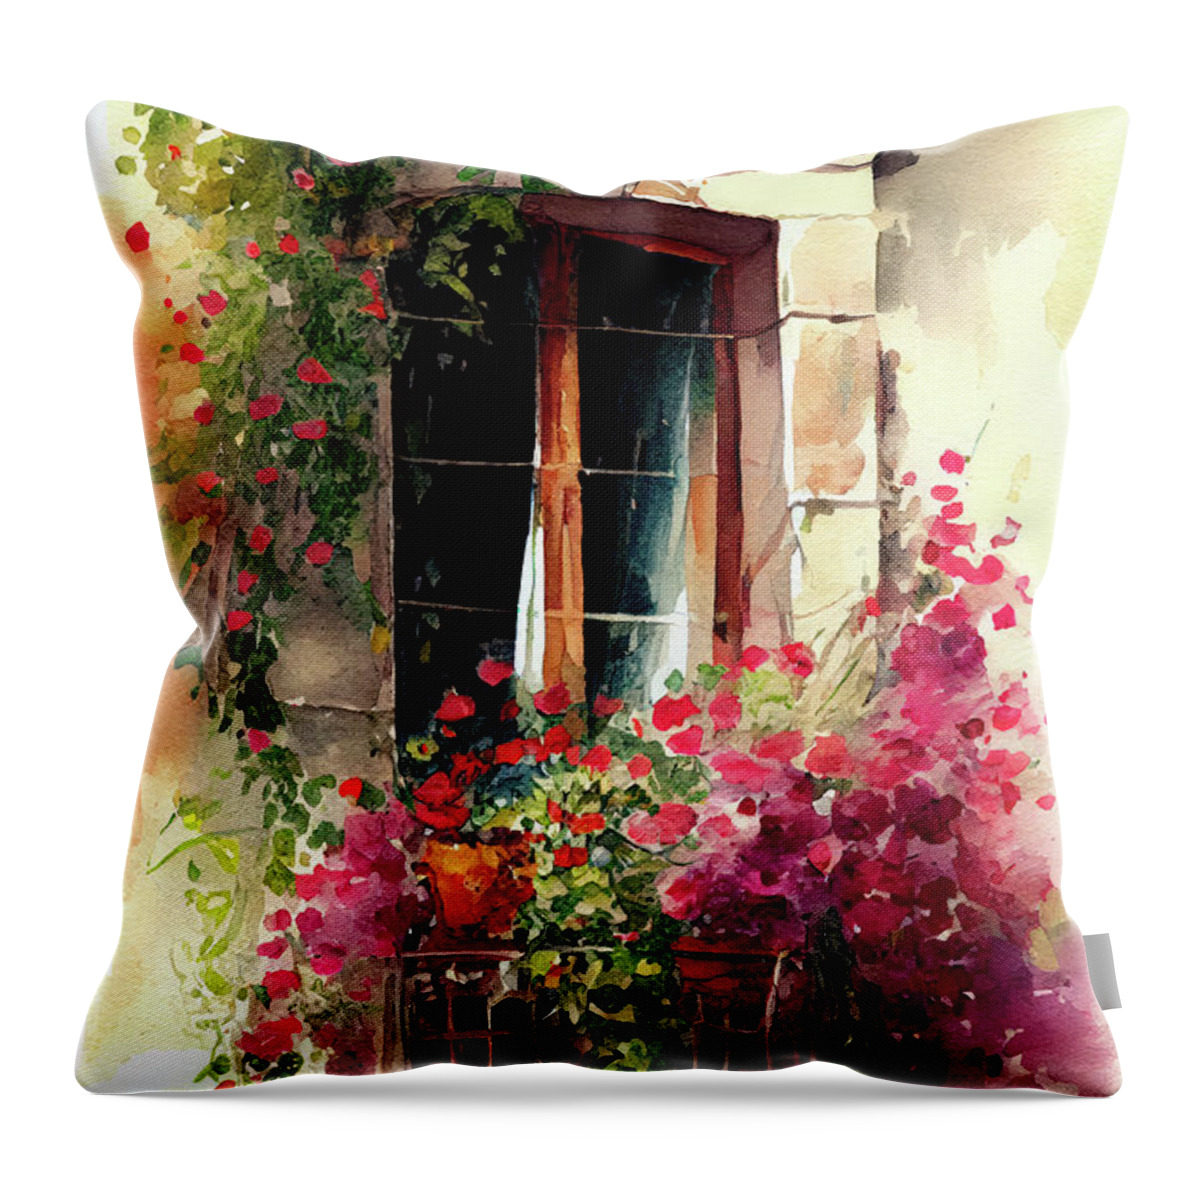 Adorned In Blooms Throw Pillow featuring the painting Adorned in Blooms by Greg Collins